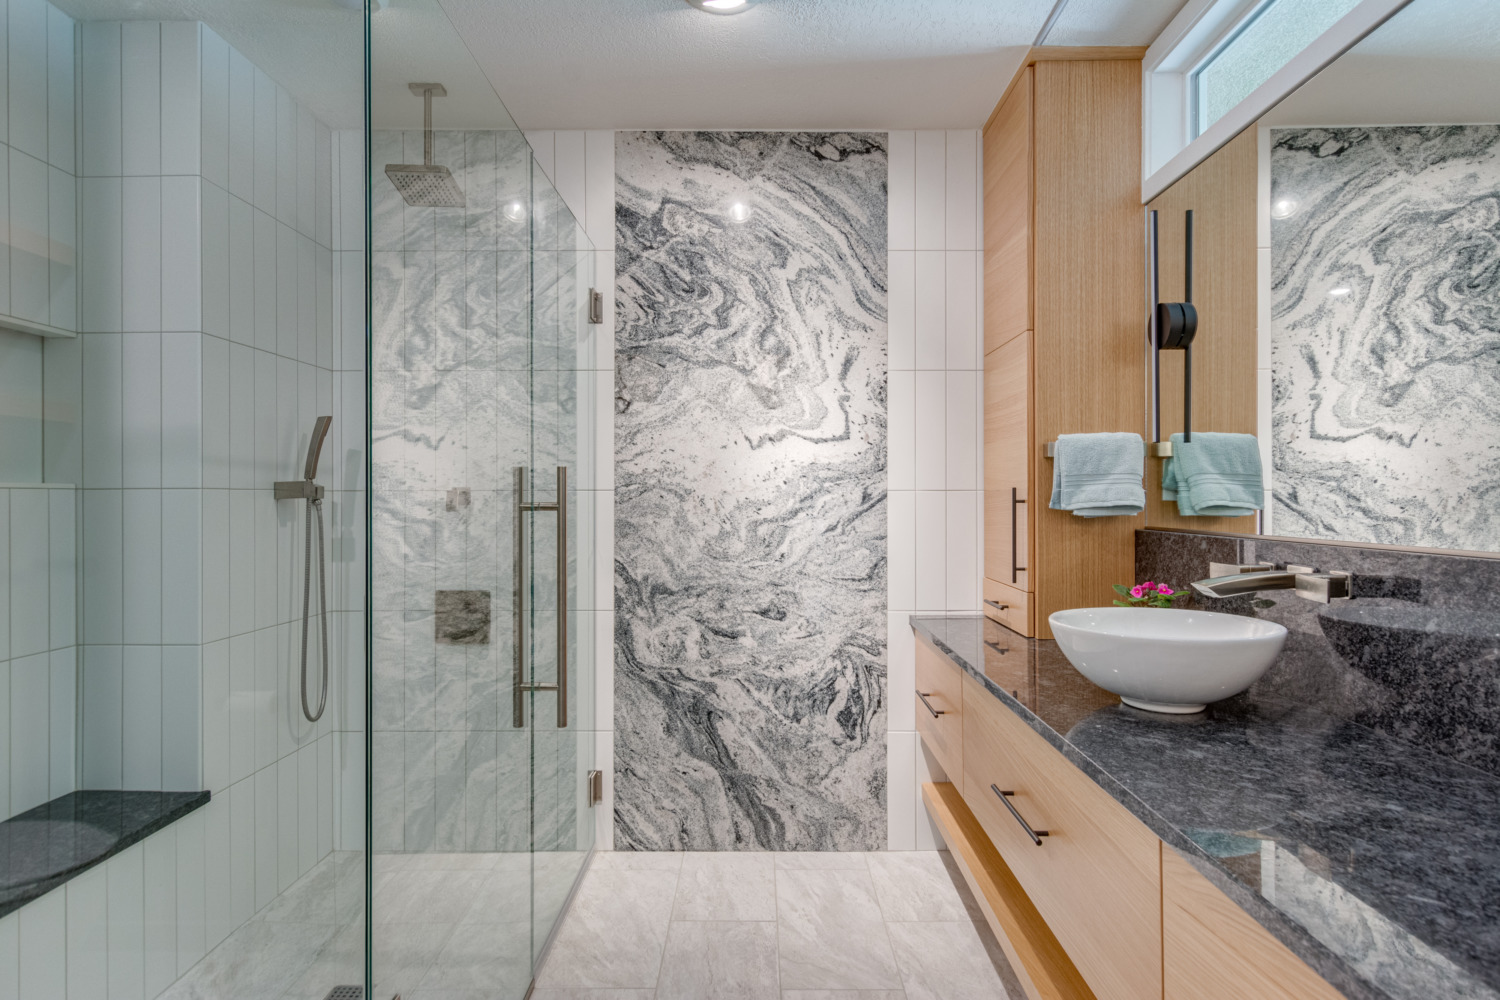 A bathroom with marble counter tops and a glass shower.